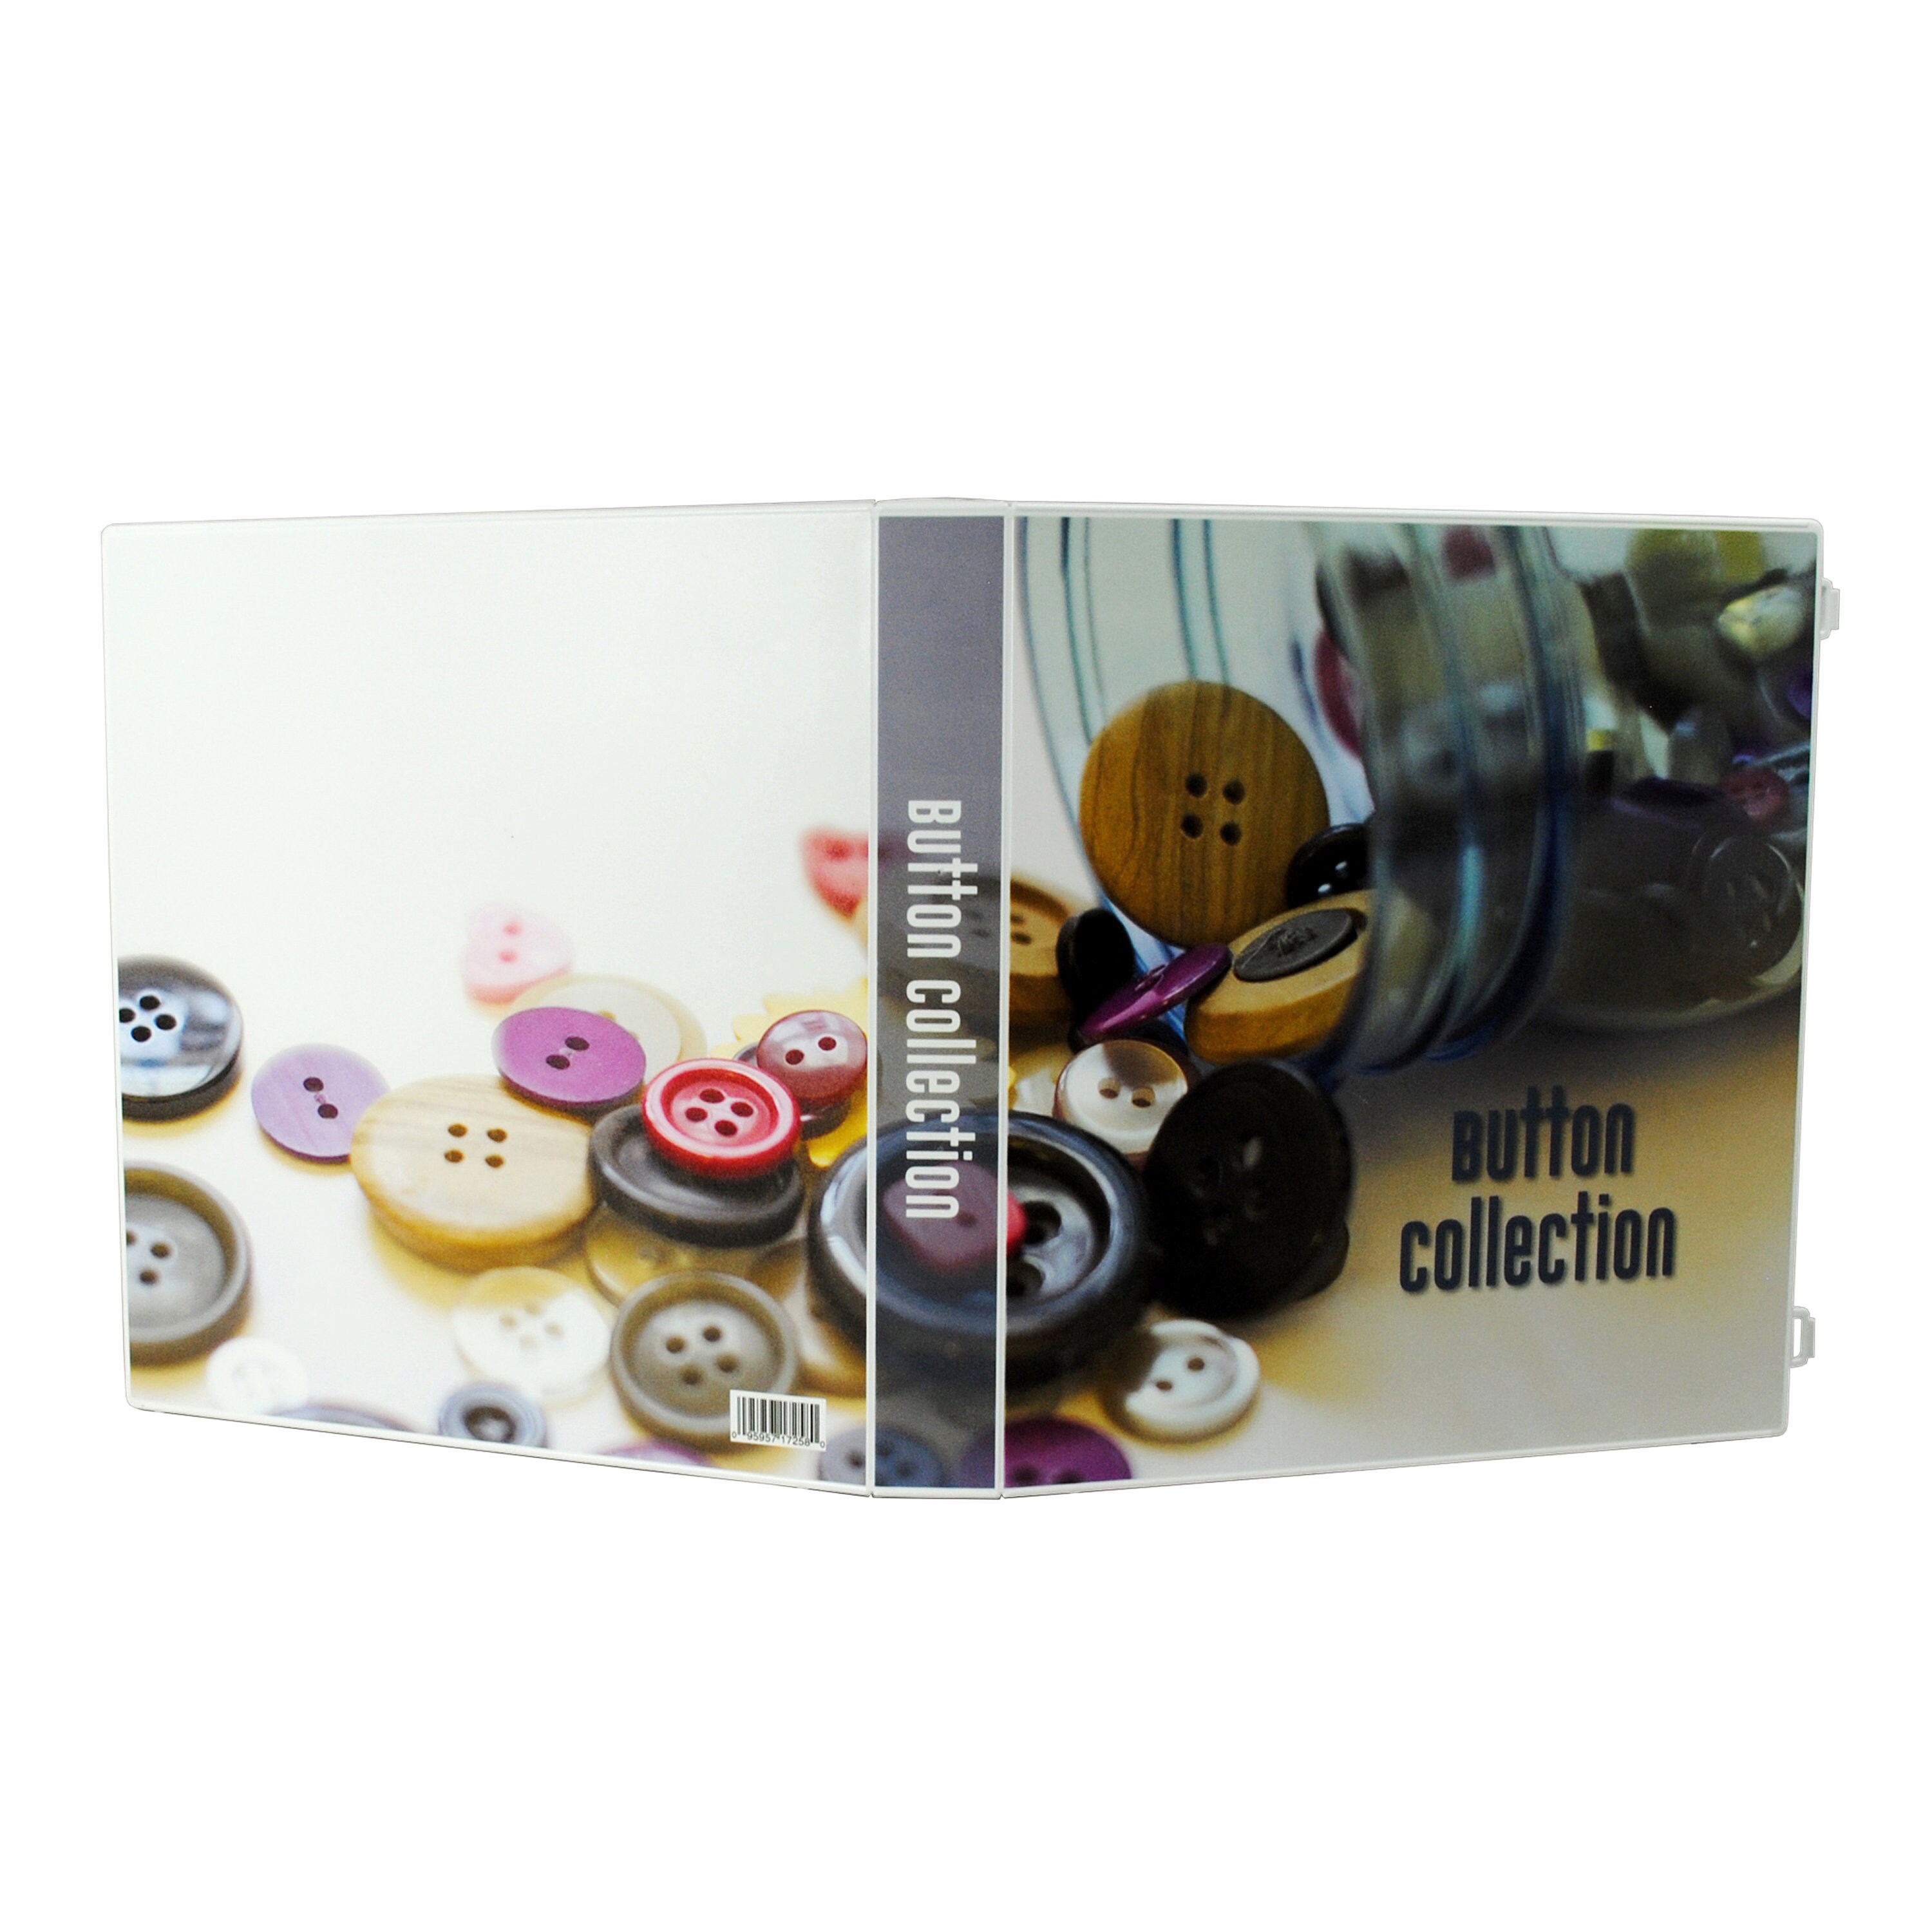 Button Collection Storage Album 10 pages and 200 Pouches Included 